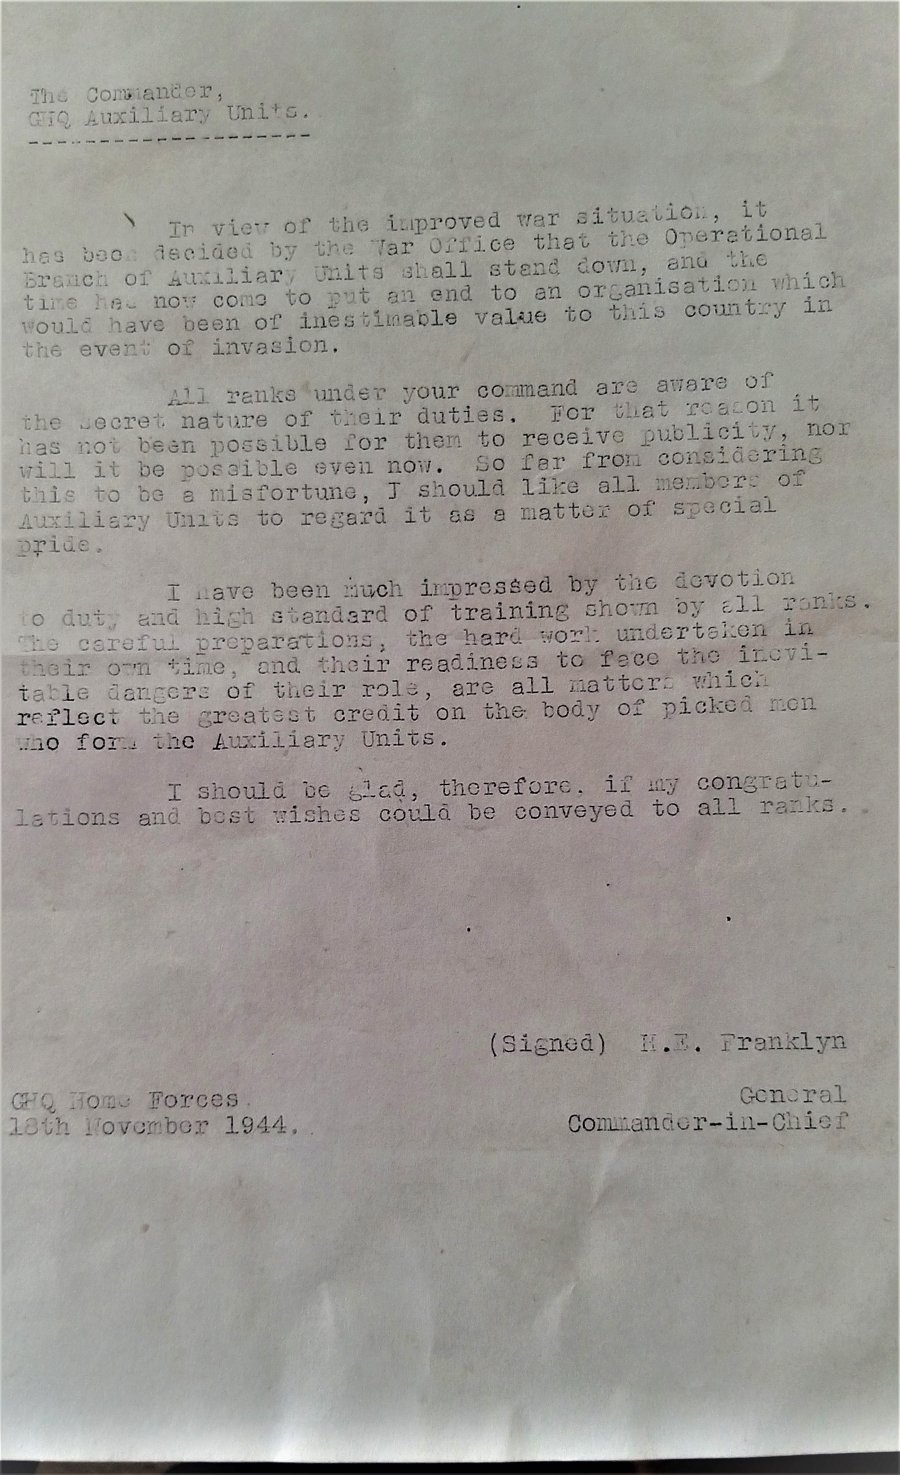 Adin More's copy of the Stand Down letter sent by General Franklyn in 1944